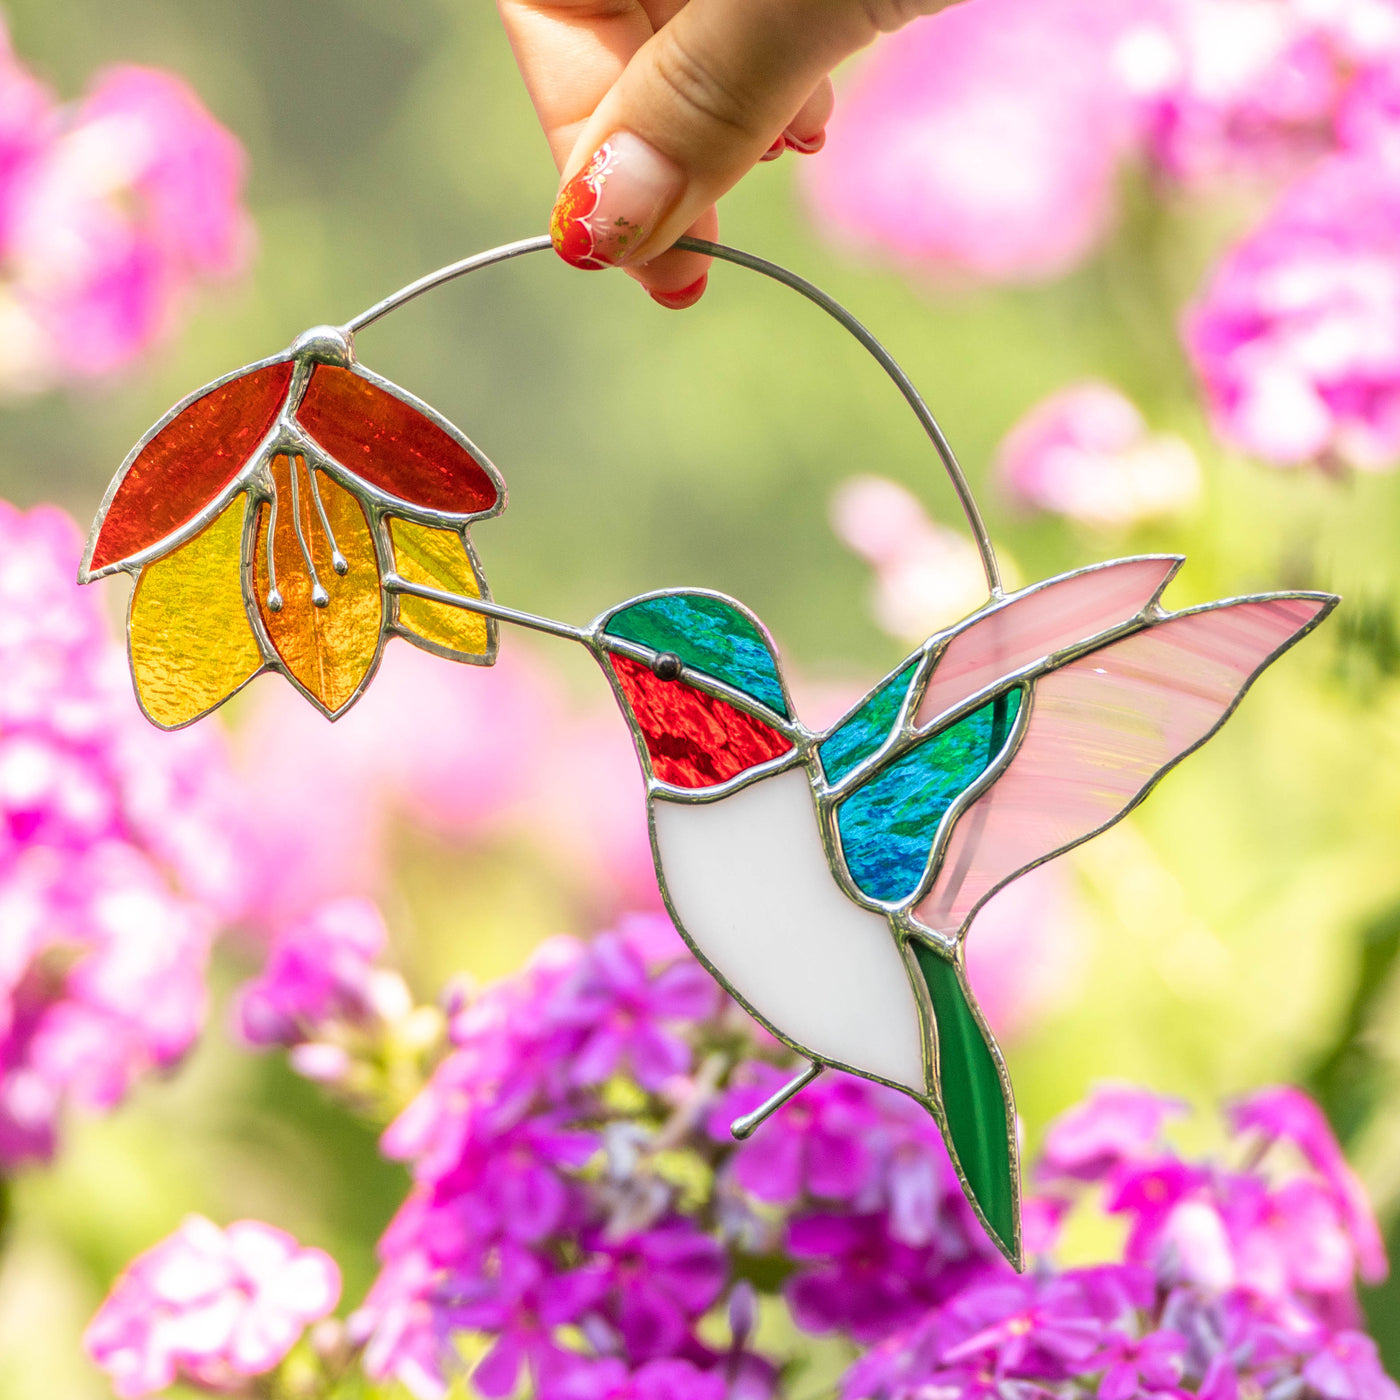 Stained glass hummingbird with white belly with the flower suncatcher